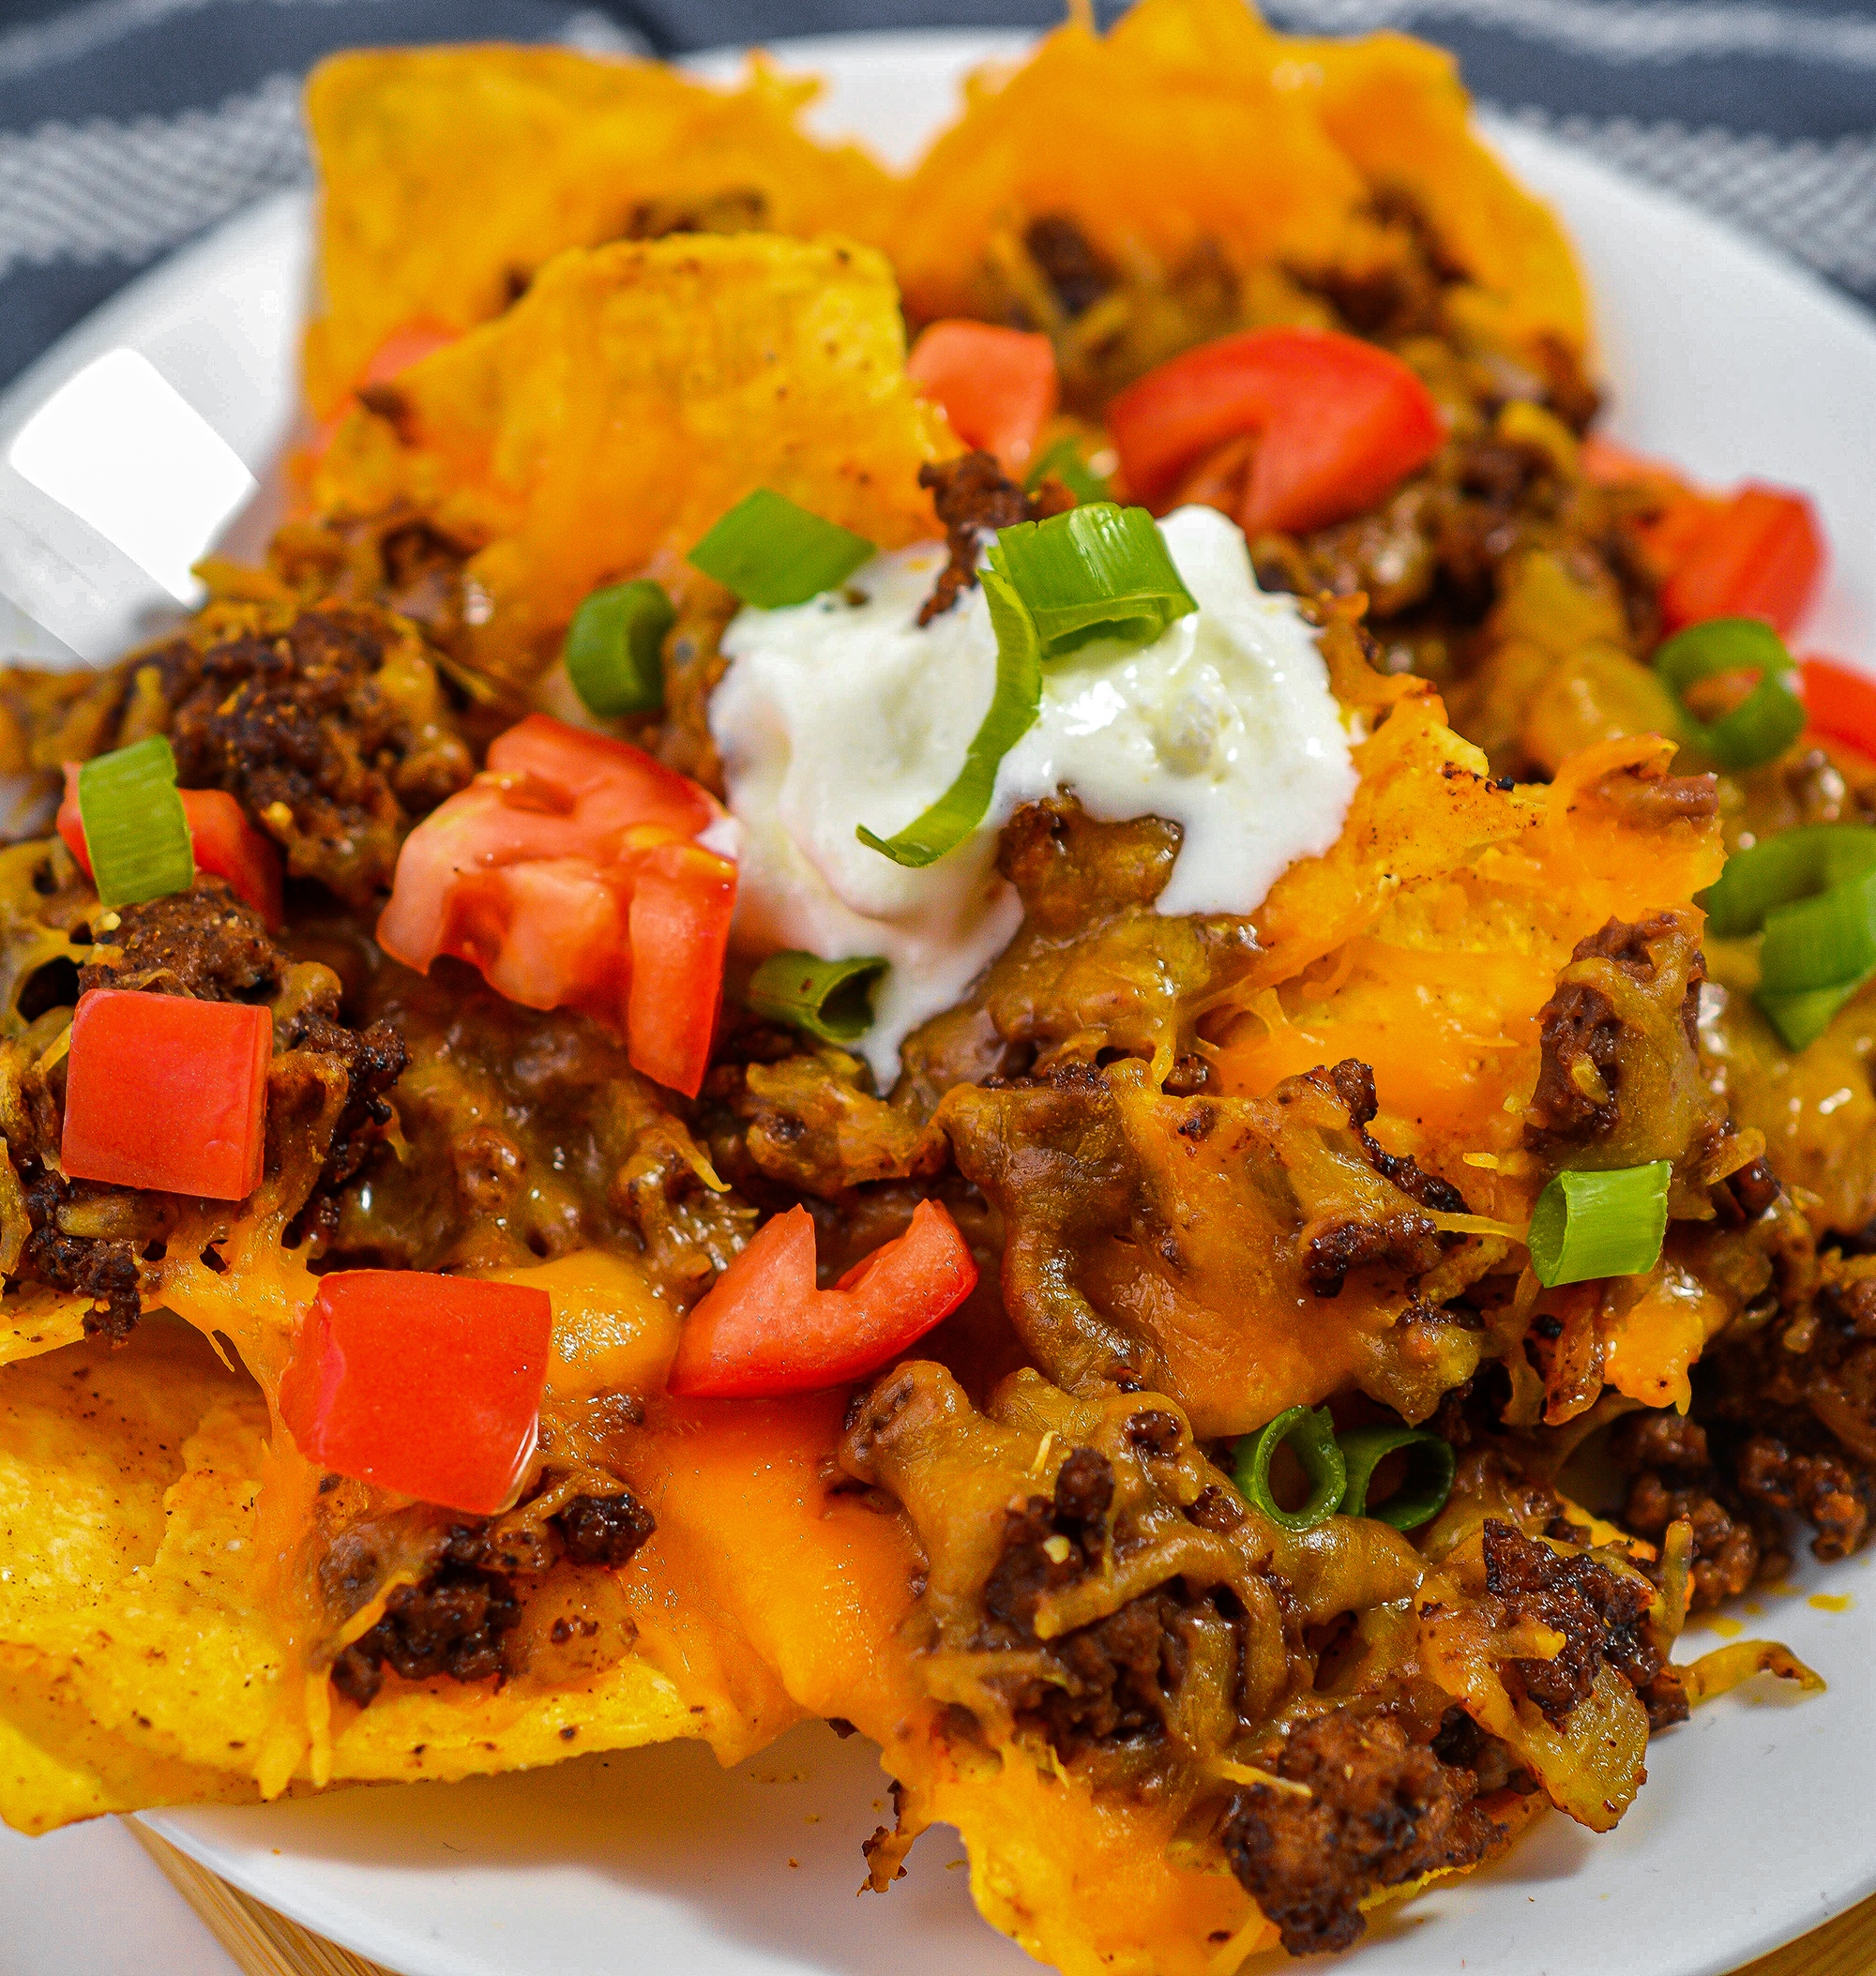 Quick & Easy Dinner Nachos Supreme - Pace Foods